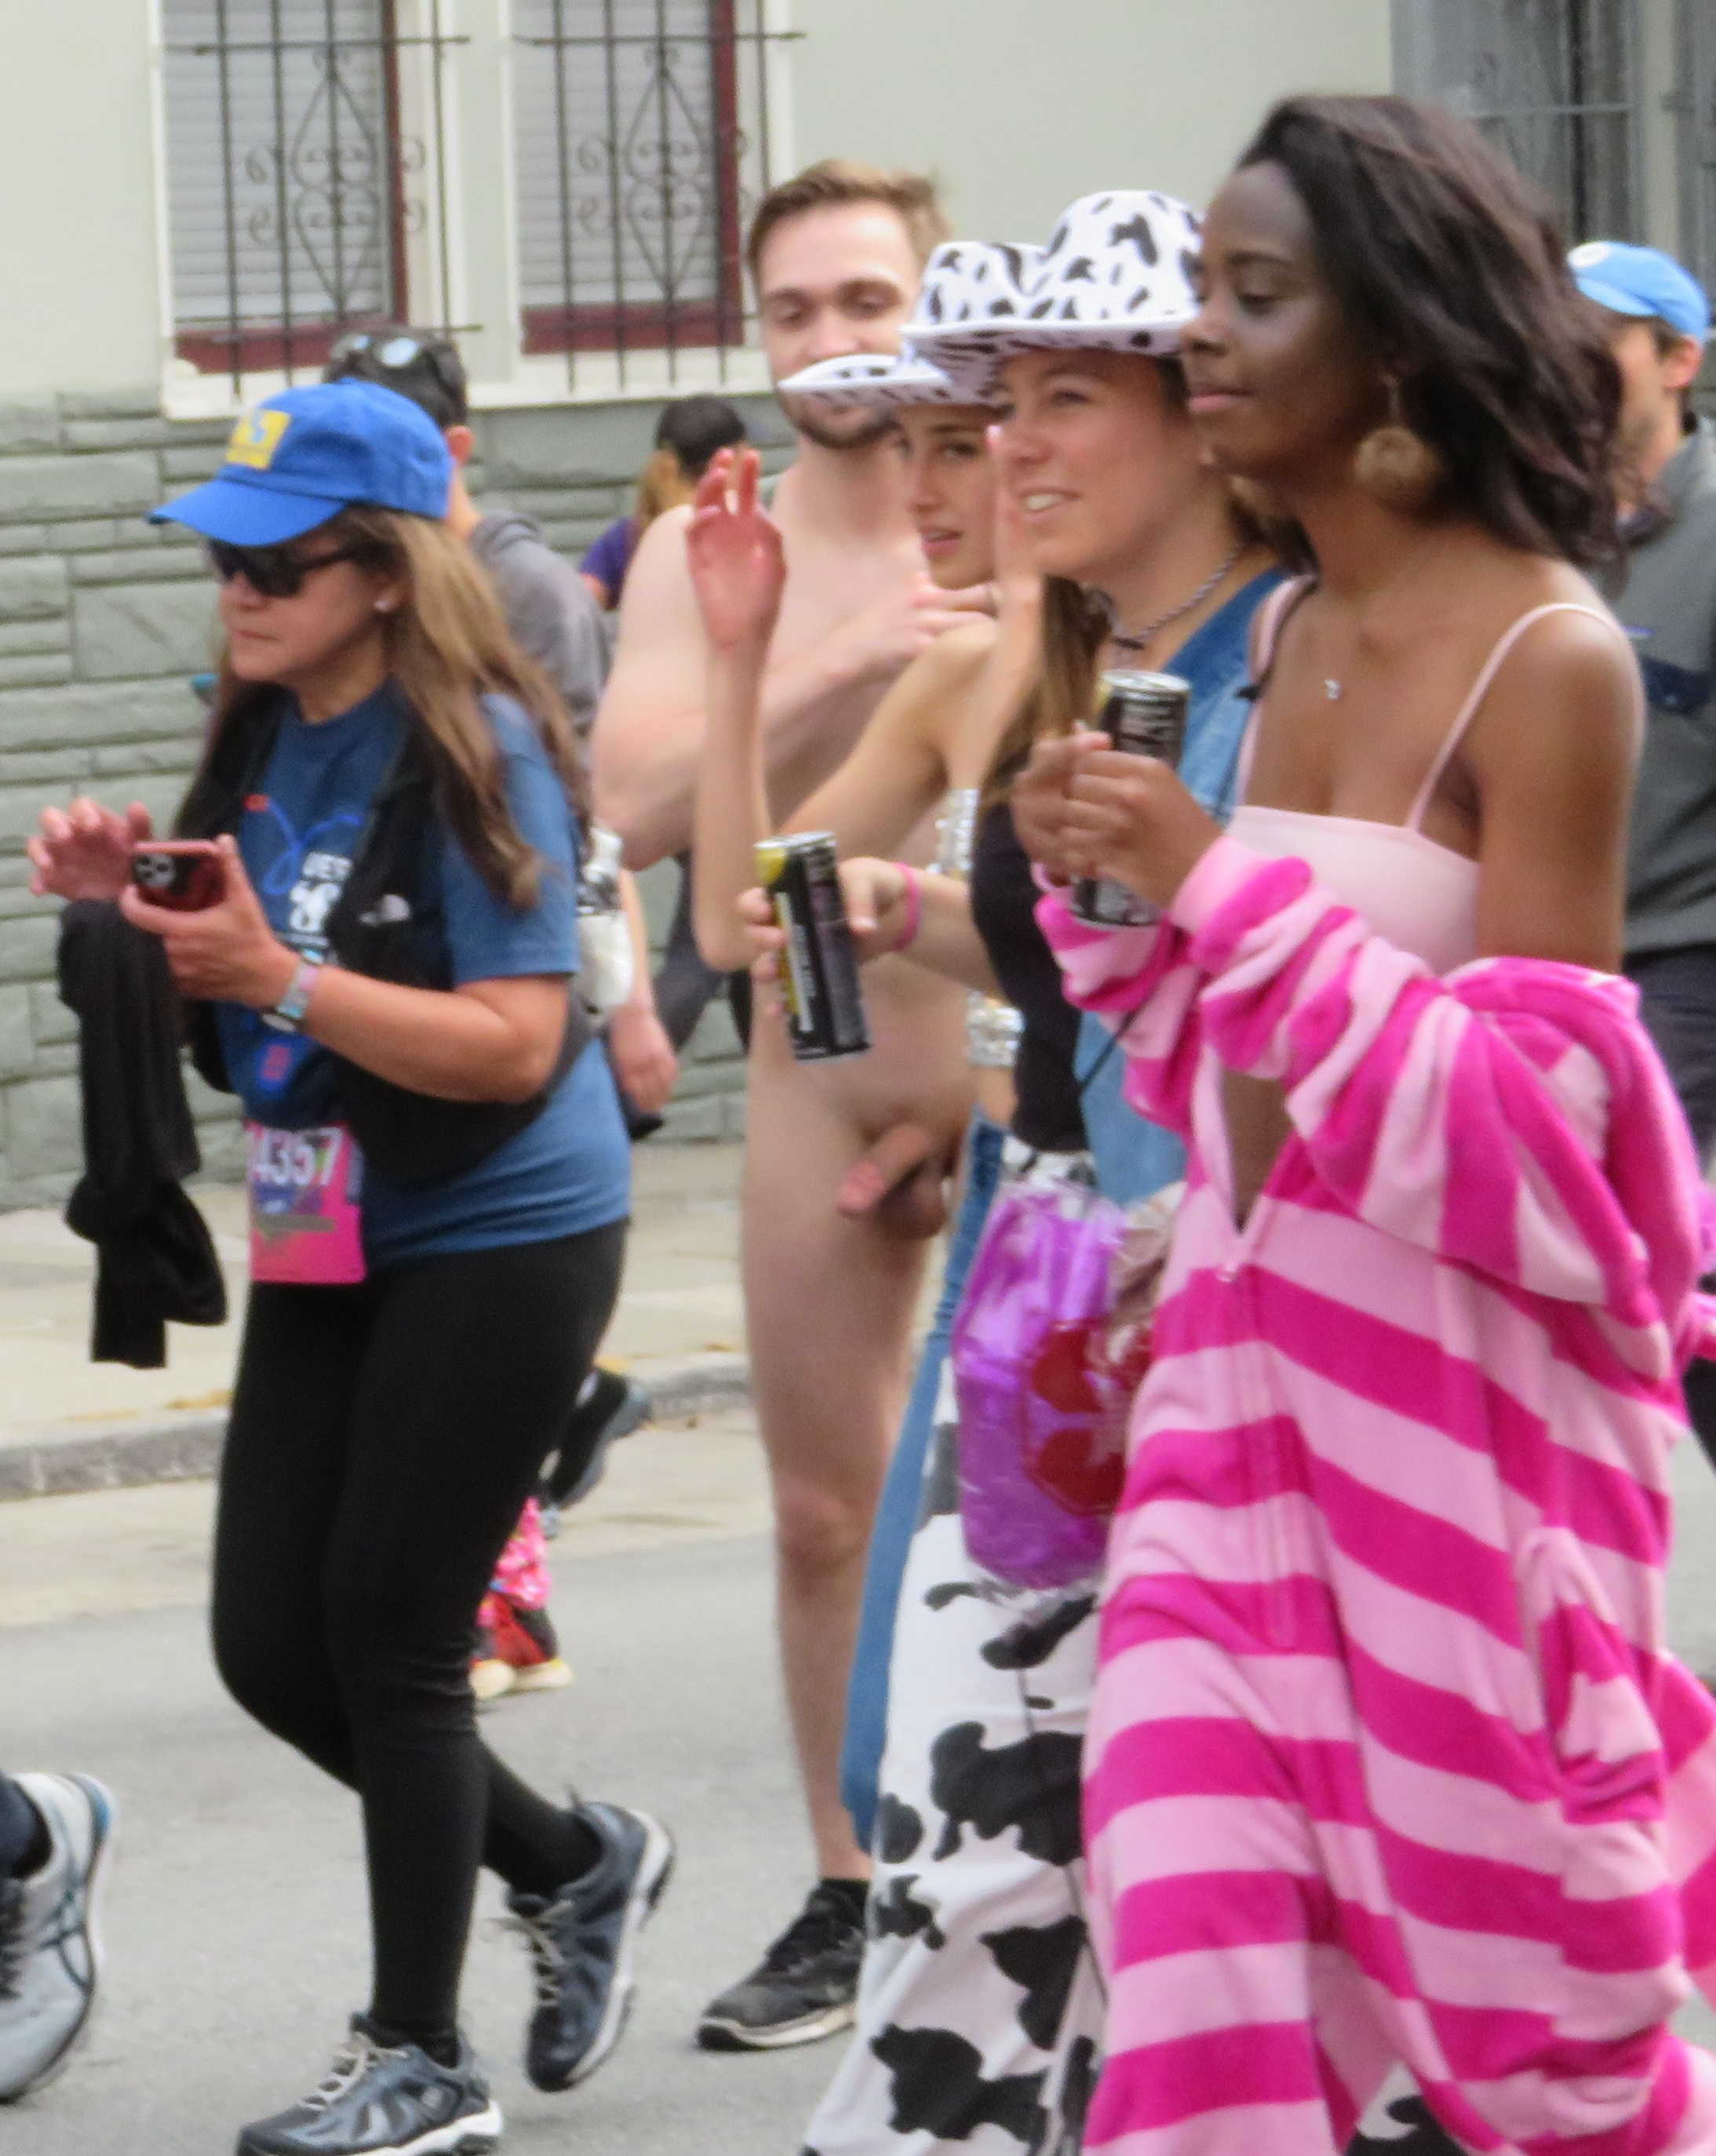 guys naked in public at Bay to breakers 2